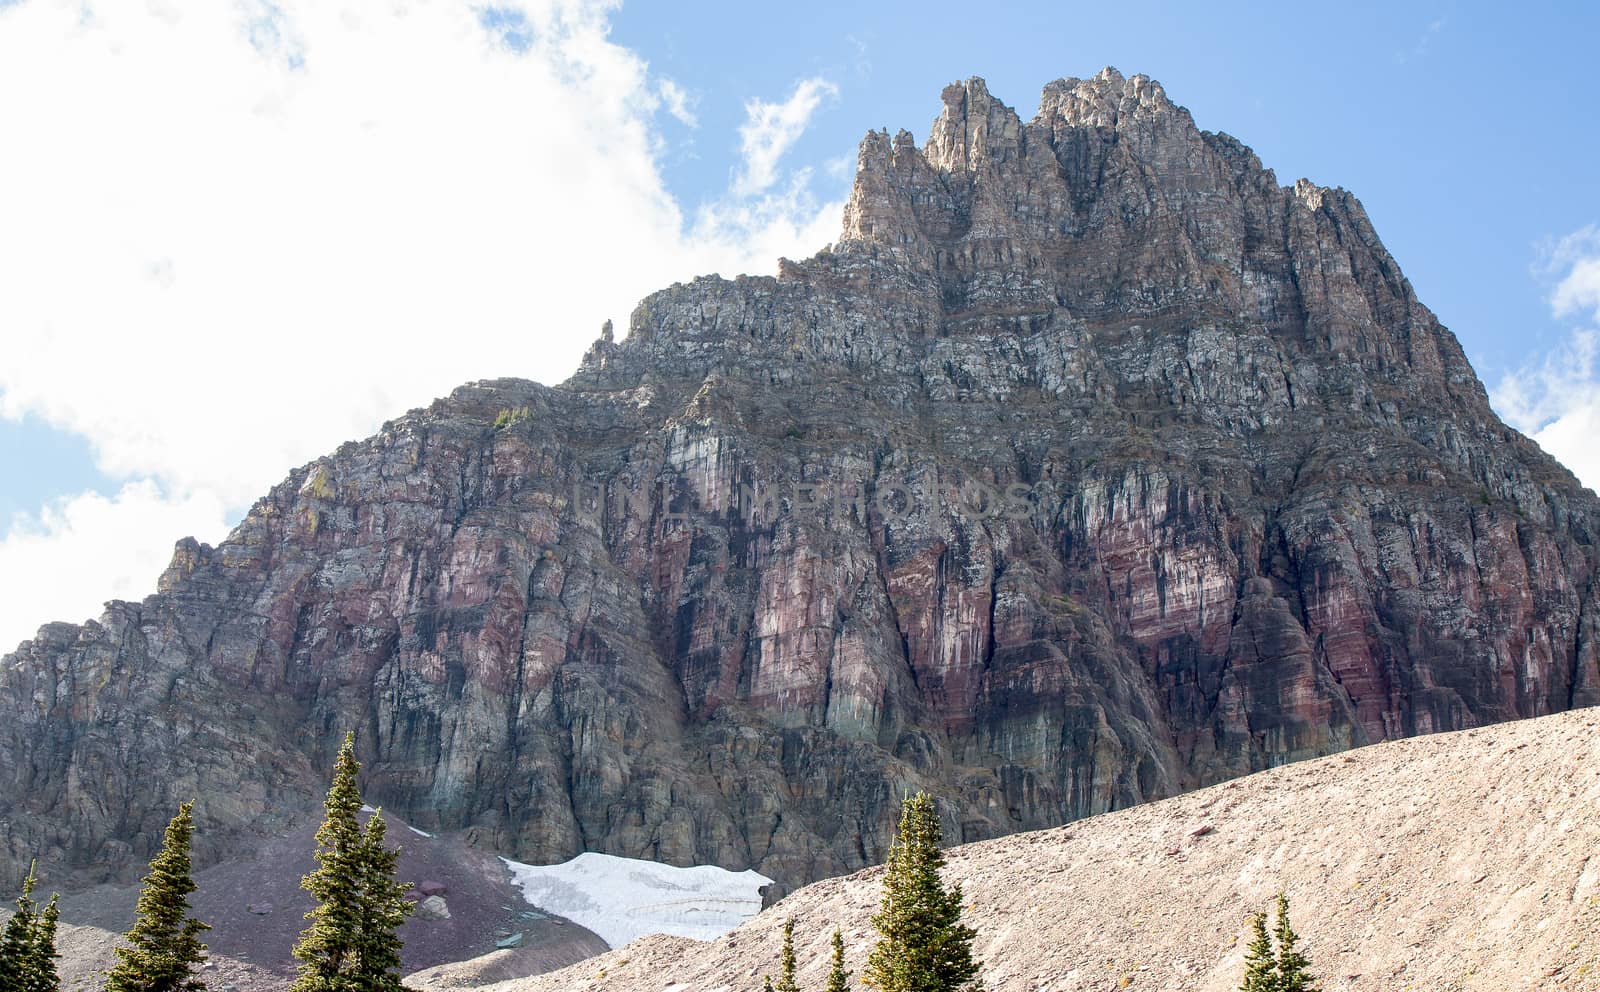 This image of Mount Reynolds at Glacier National Park shows purple rock face and remnants of a snow field.